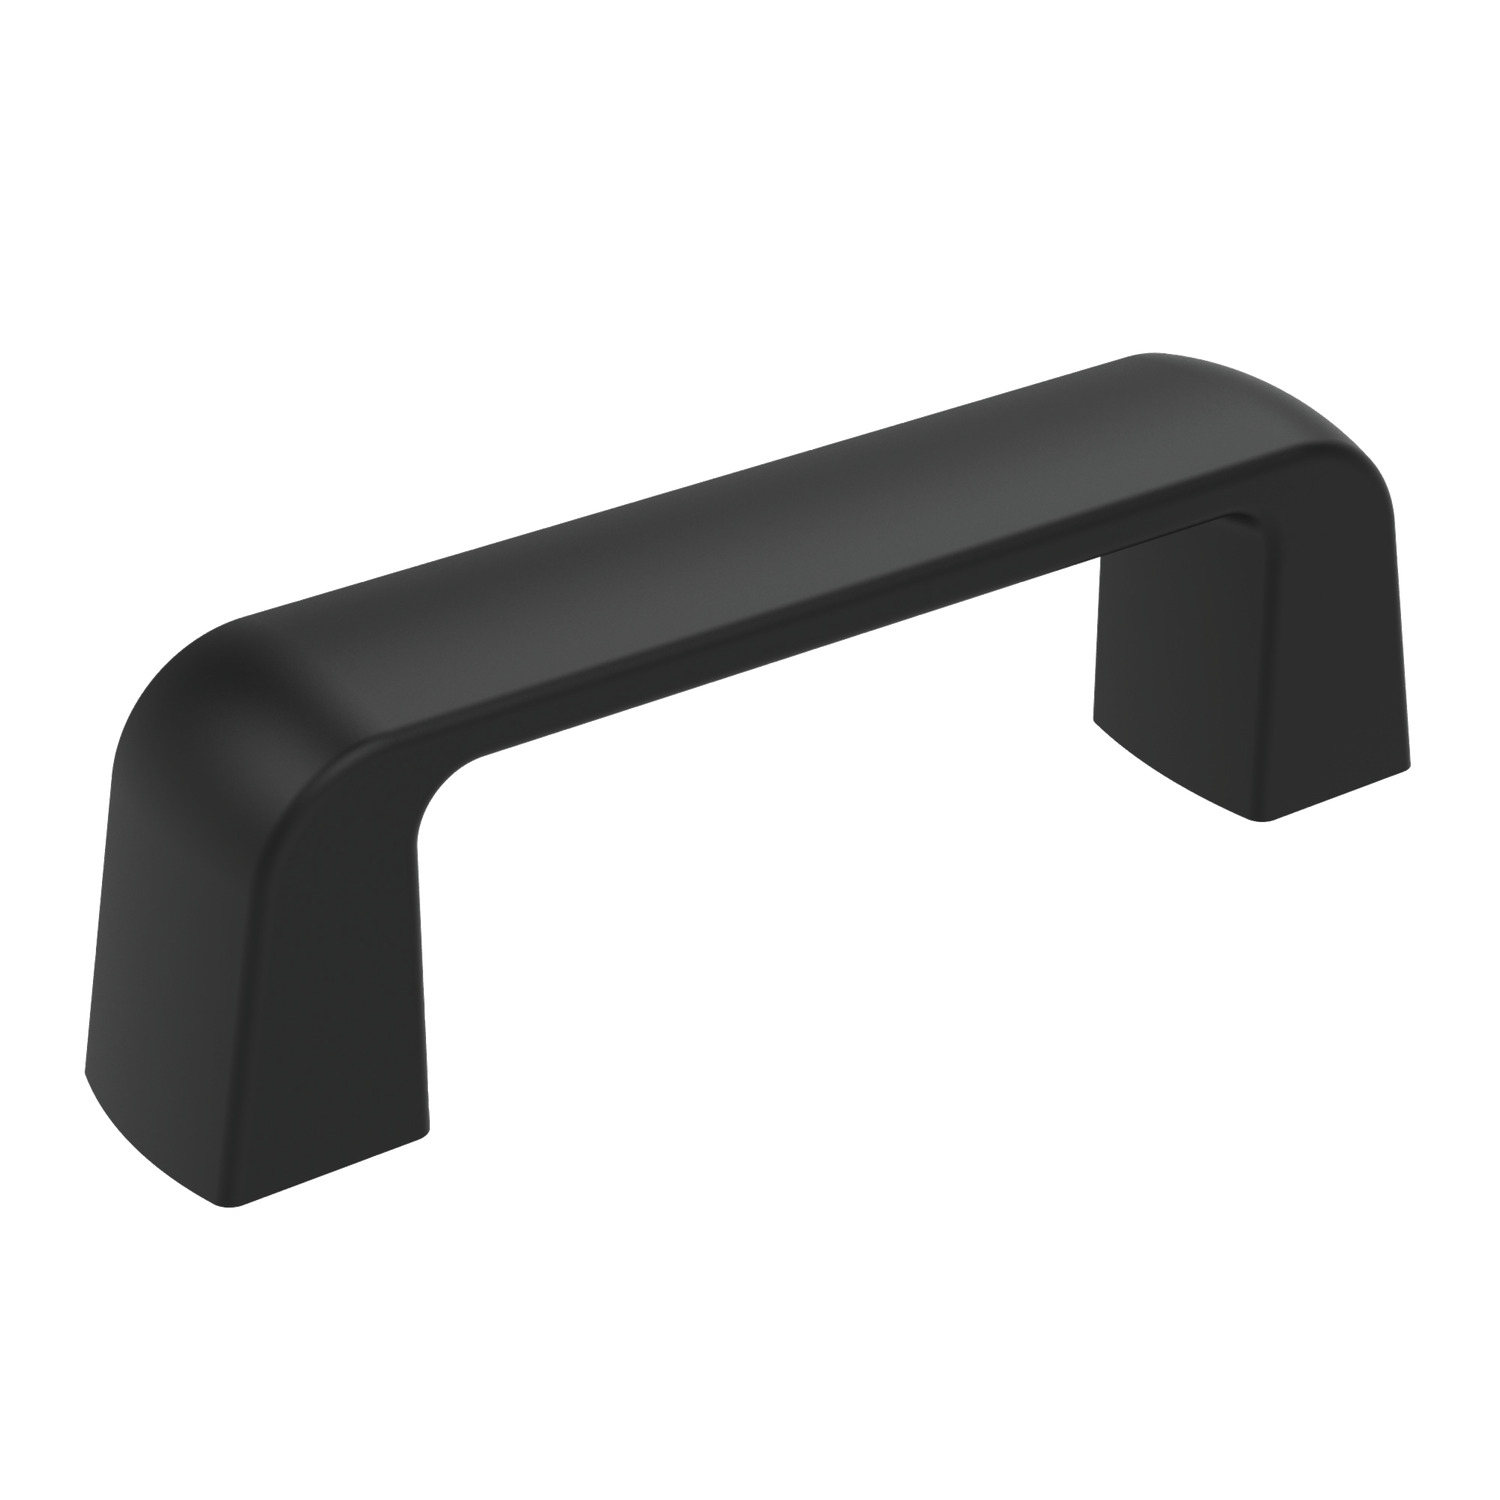 Product 79180, Plastic Pull Handles rear mounting / 